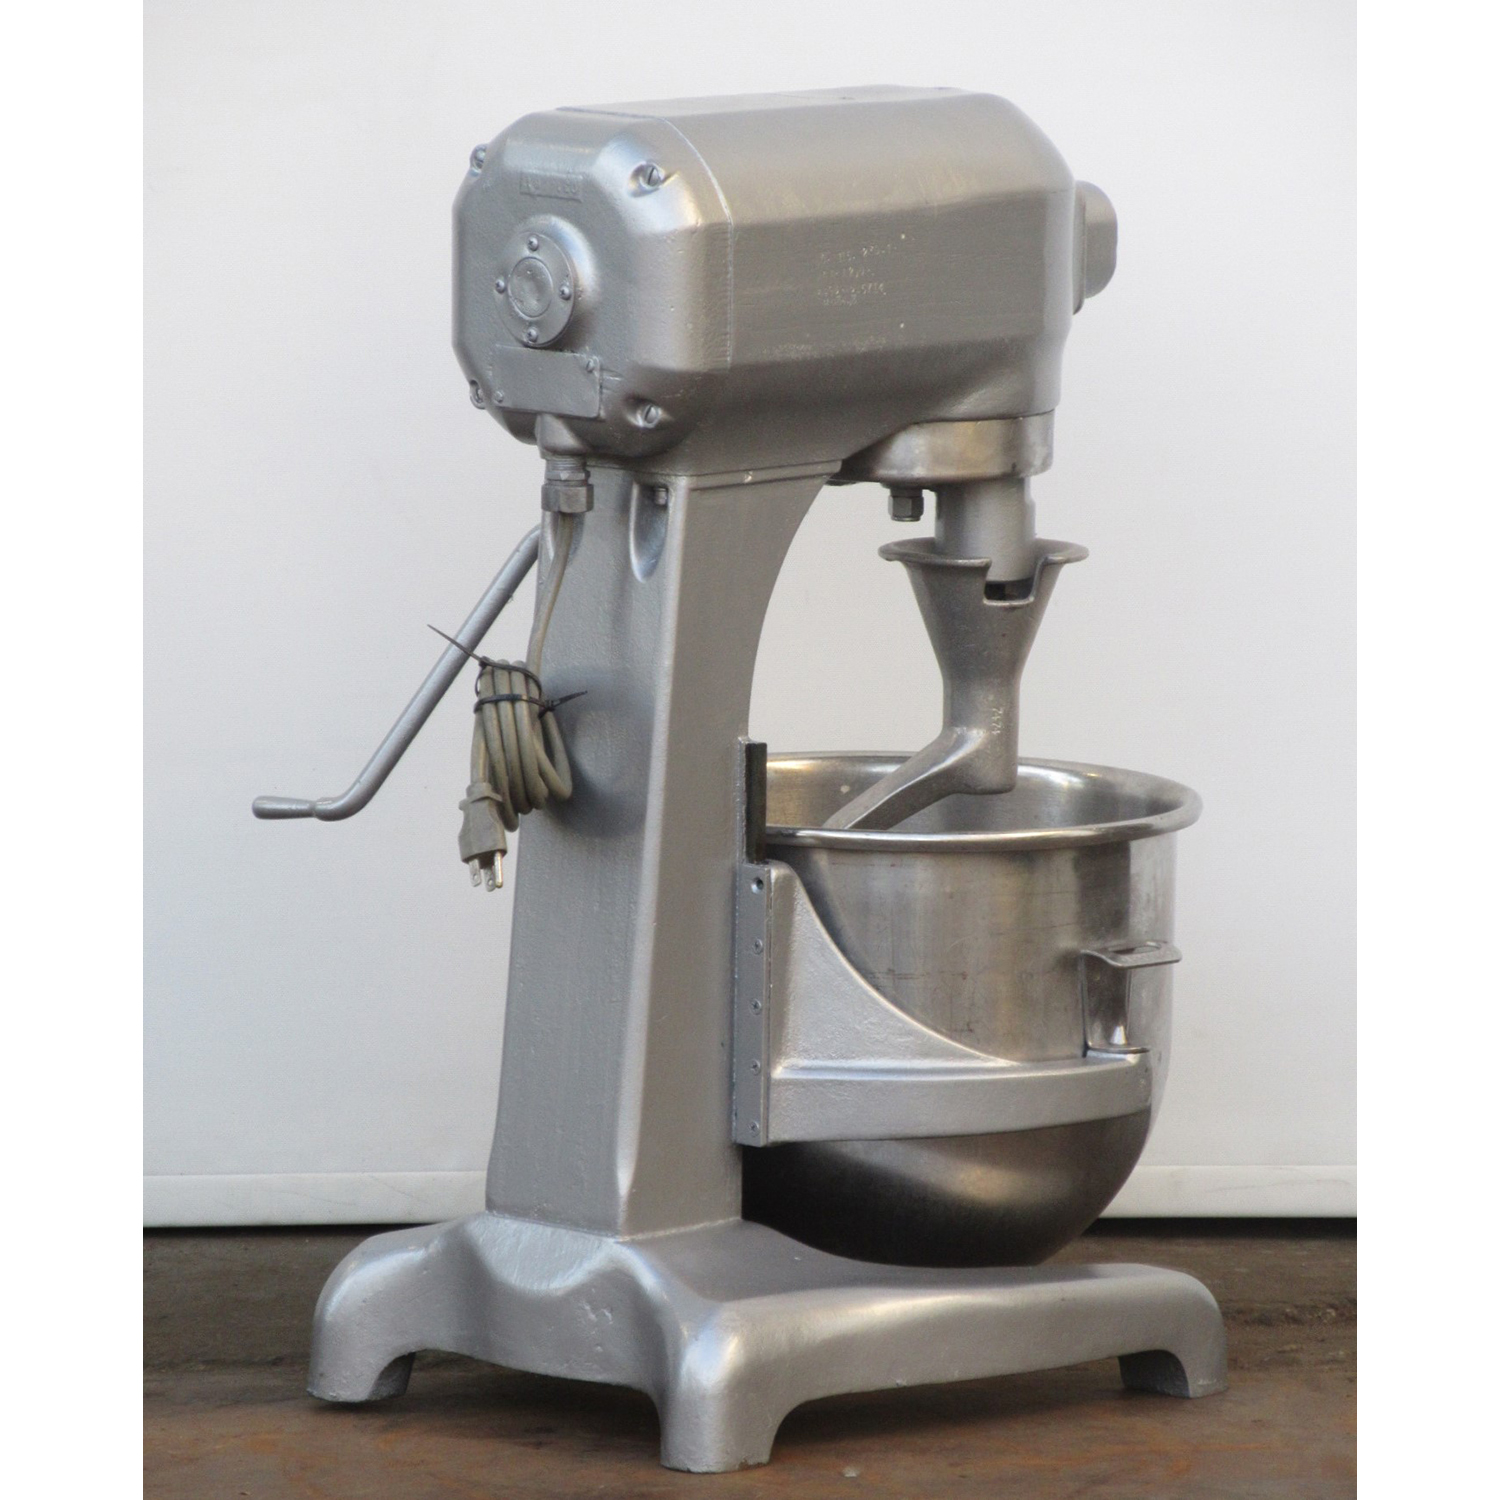 Hobart A200 Mixer 20 Qt, Used Excellent Condition image 2